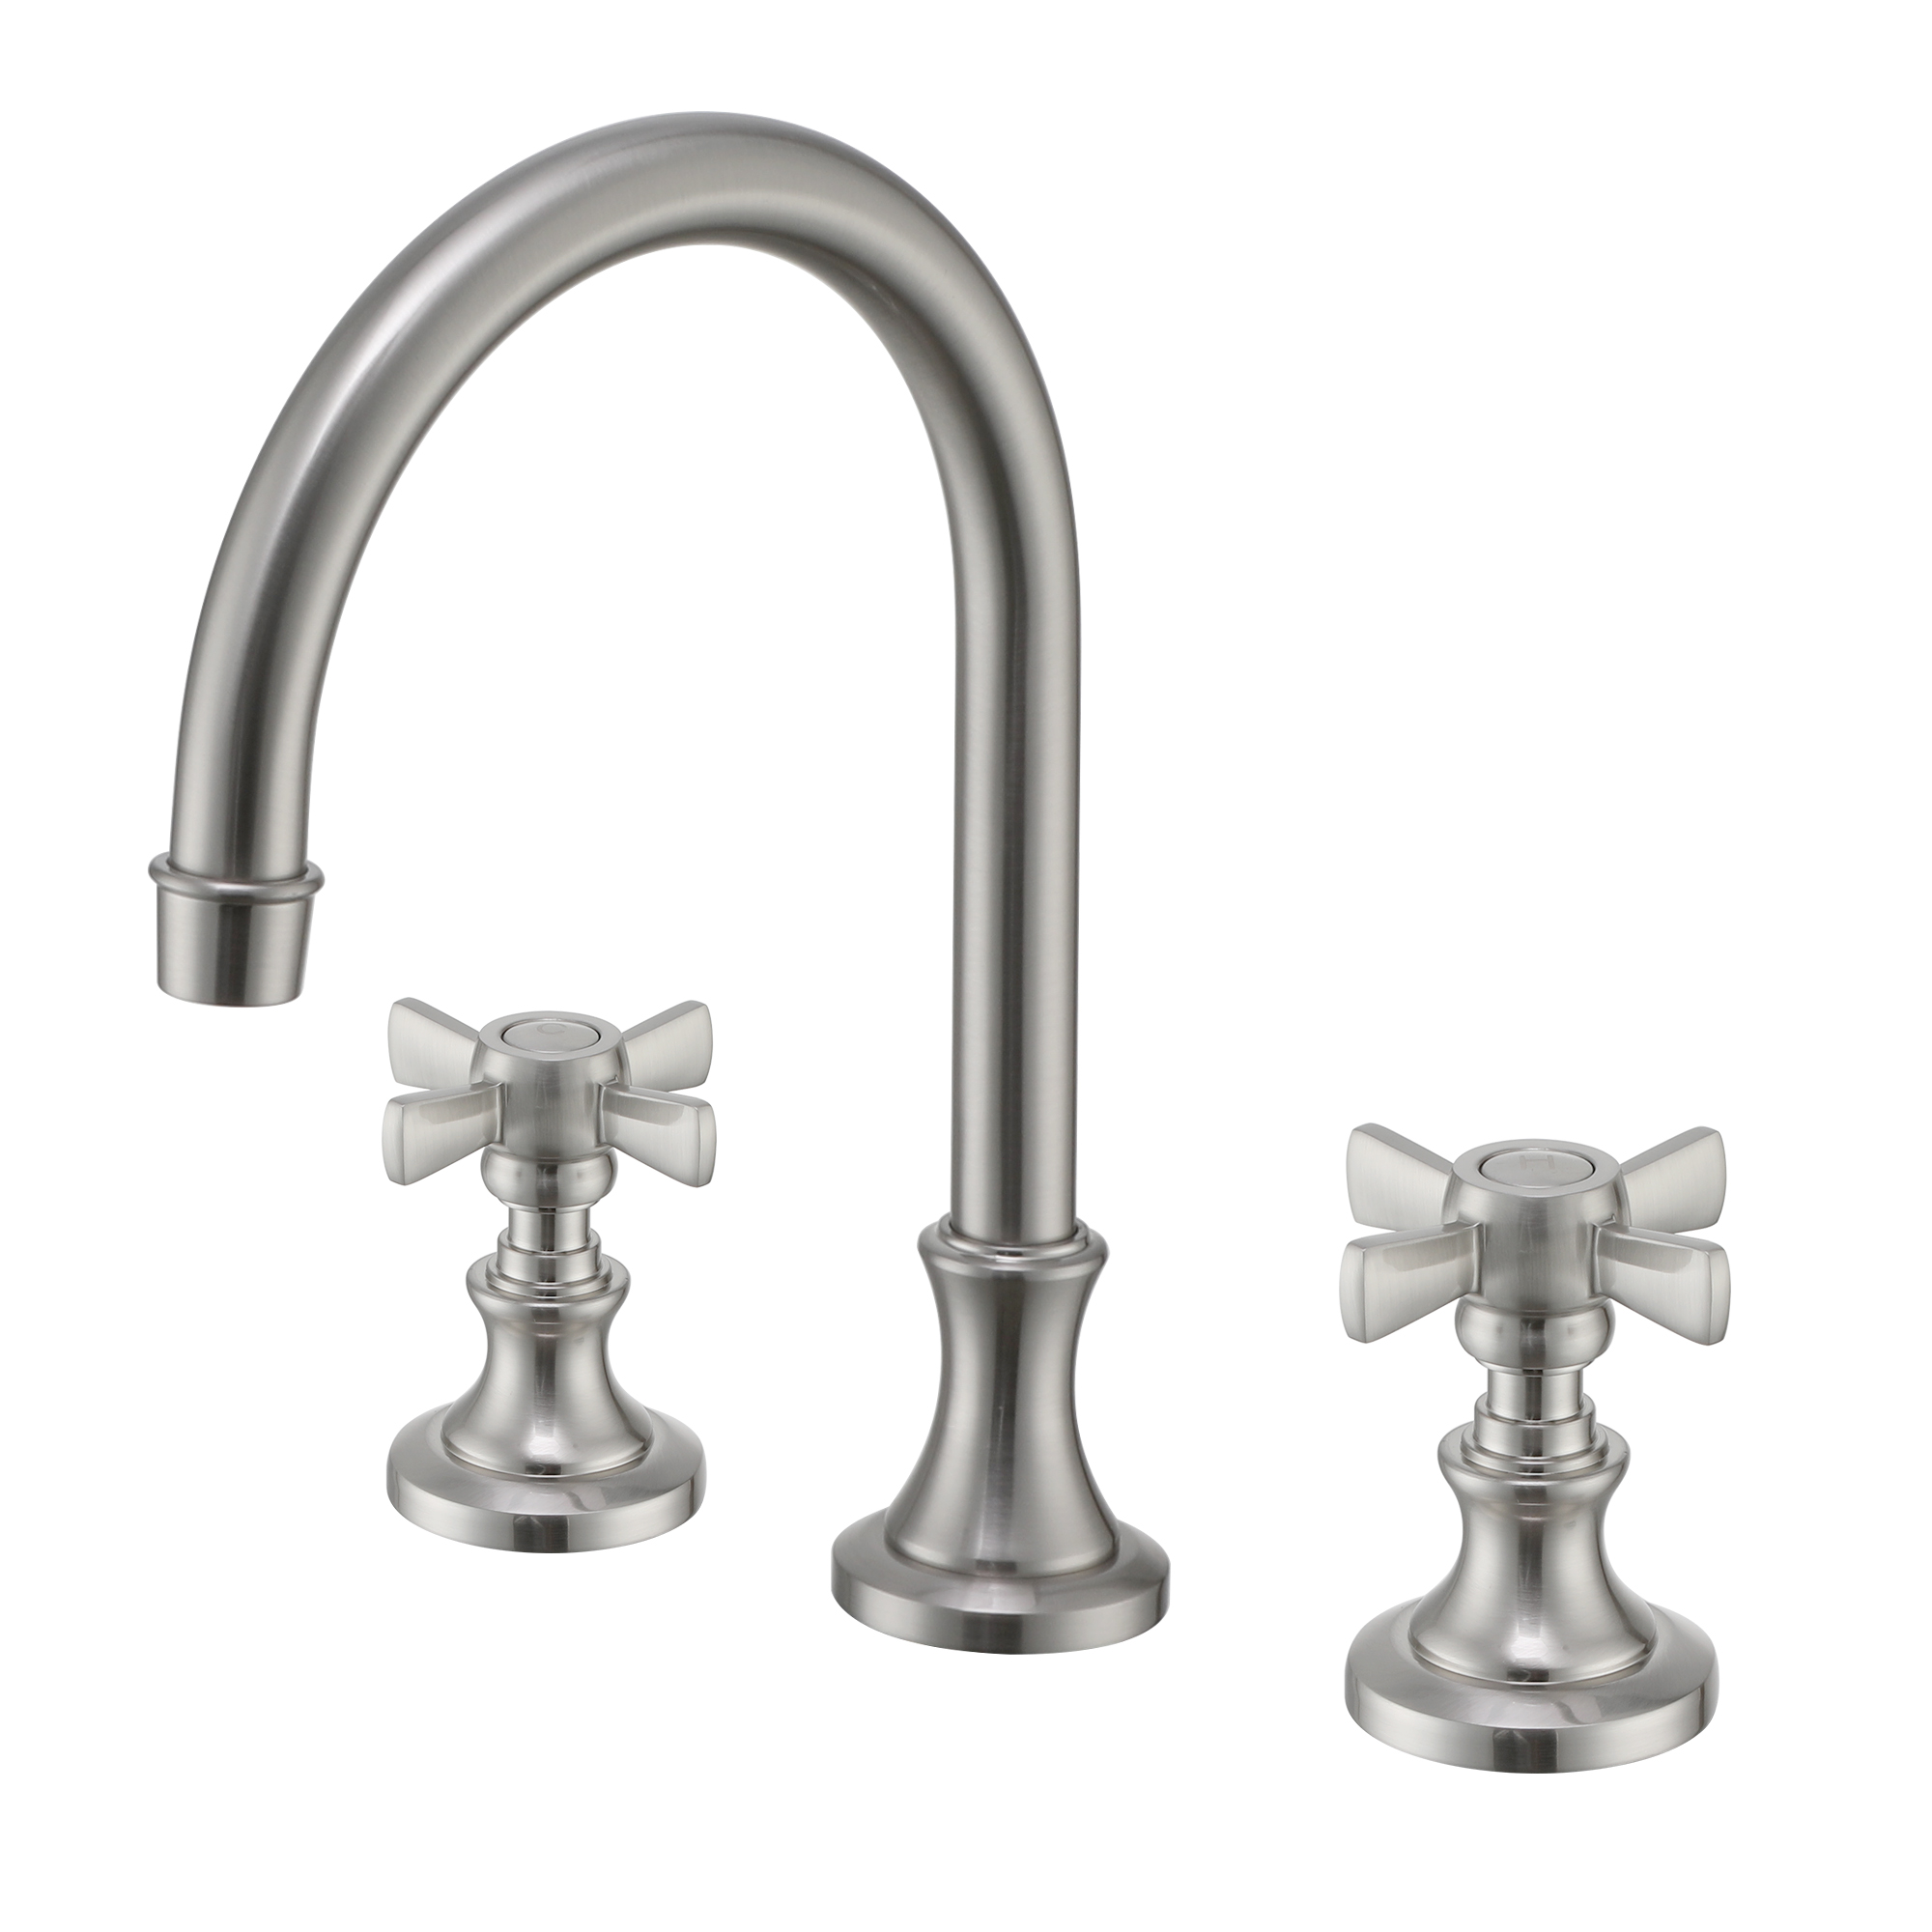 3 Hole Bathroom Faucets 8 Inch Widespread Basin Faucet for Sink